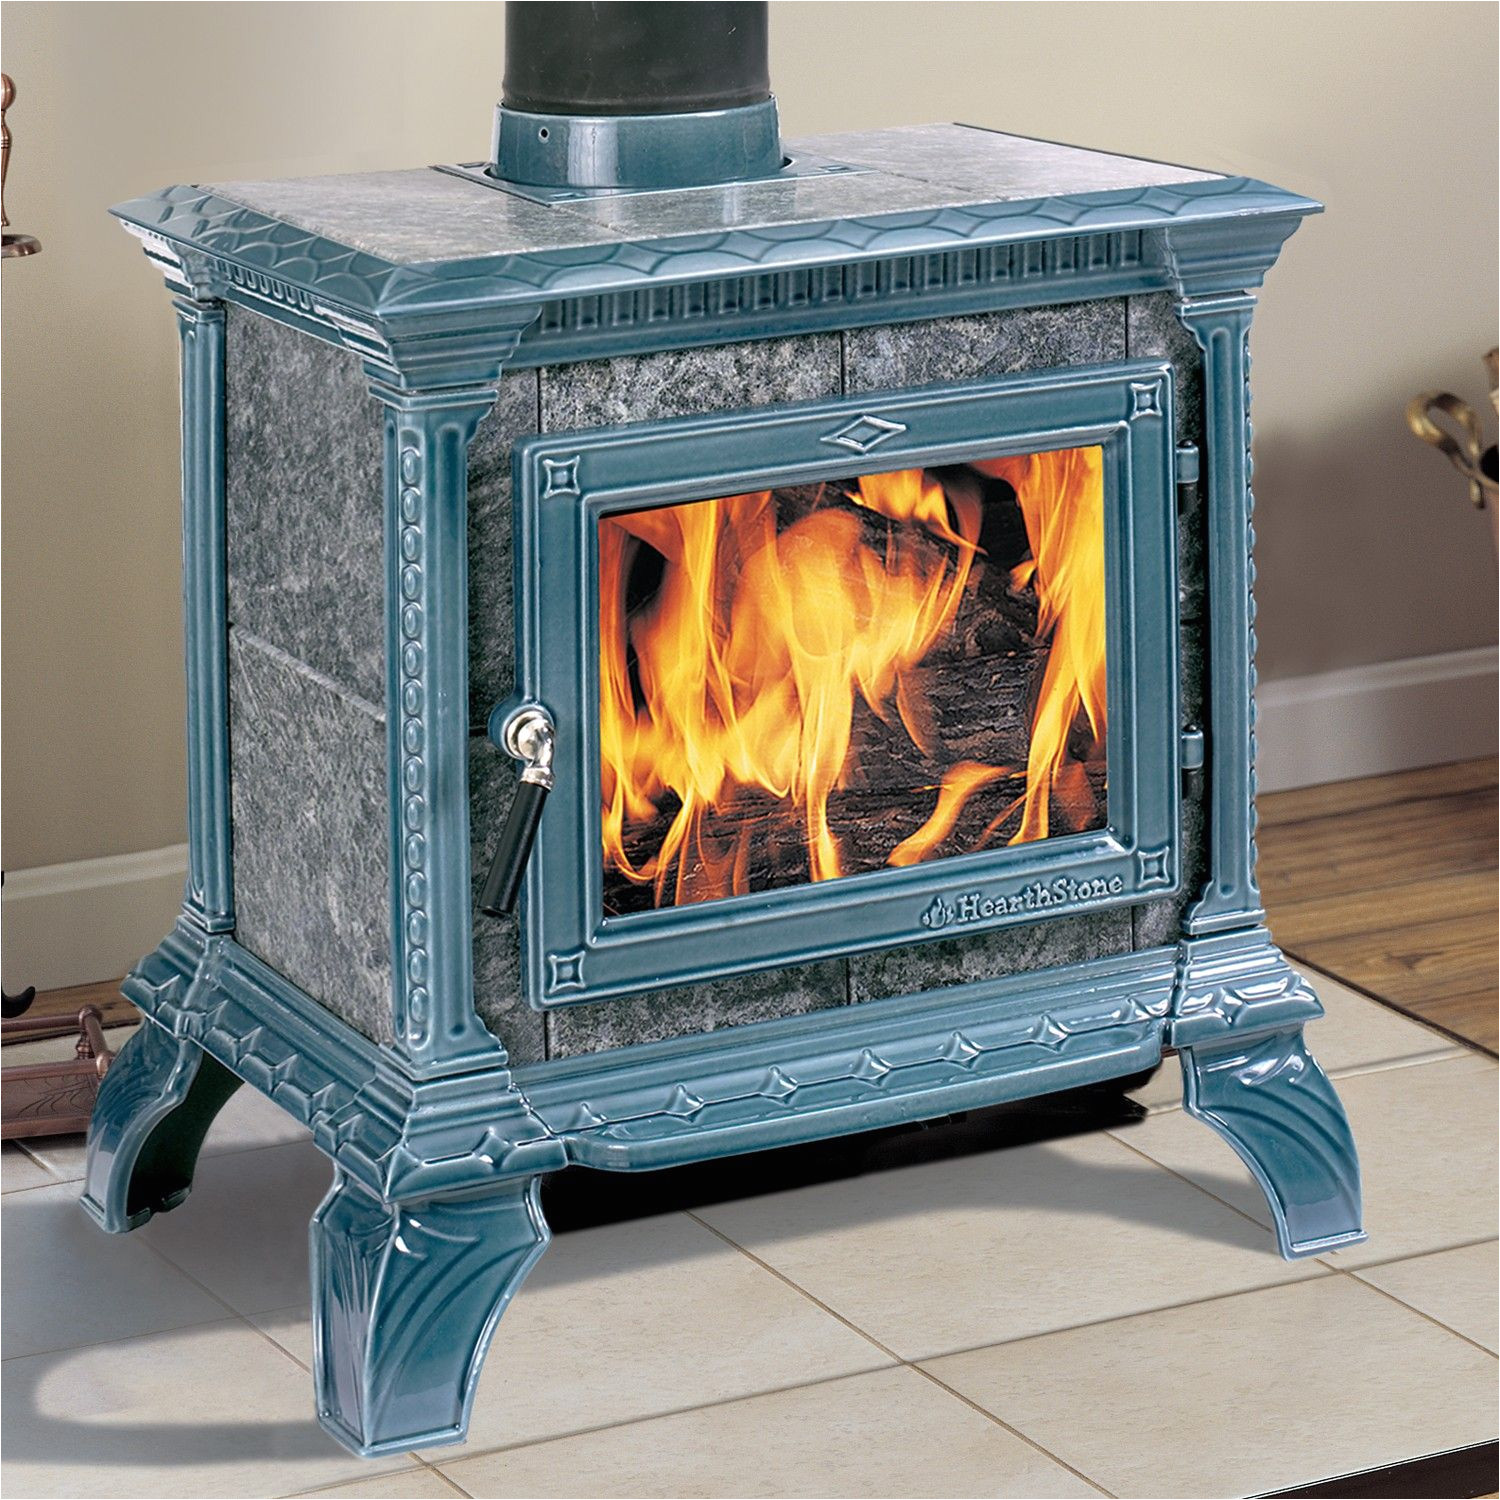 New Wood Burning Stove Hearth with Simple Decor